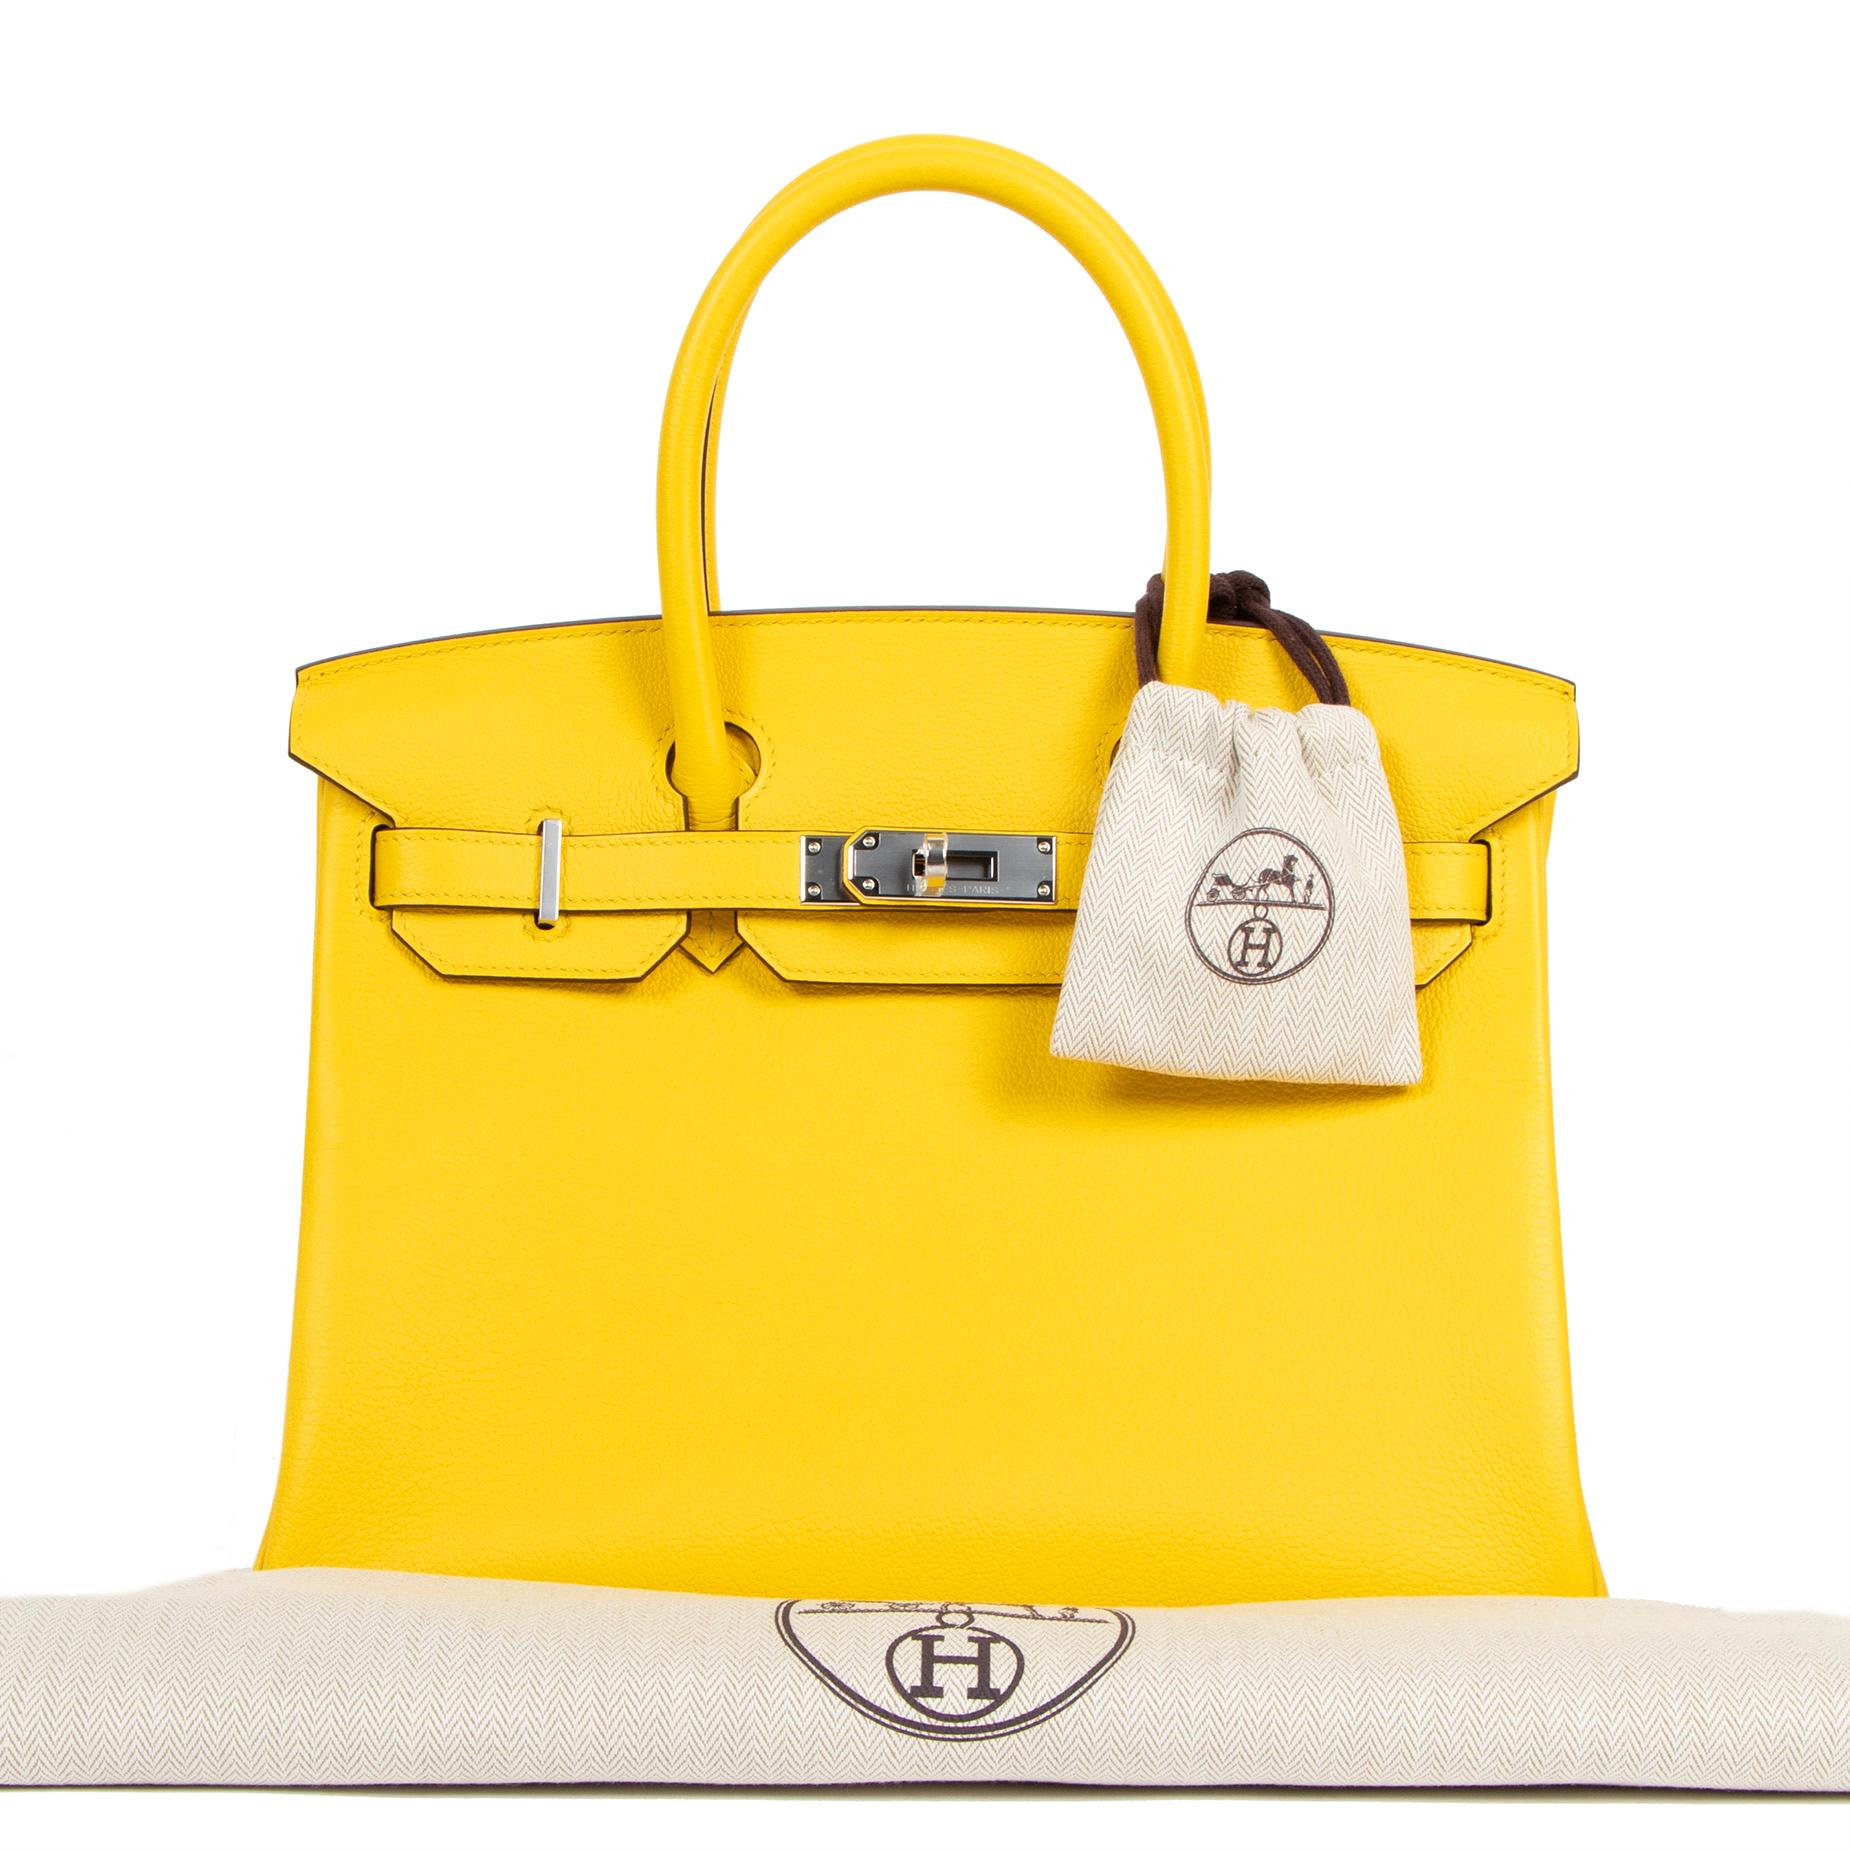 This brand new and exclusive Hermès Birkin 30 Jaune de Naples Taurillon Novilo PHW is a must-have for any fashionista out there! Its gorgeous bright yellow hue will make you stand out from the crowd. The new Taurillon Novillo leather is soft to the